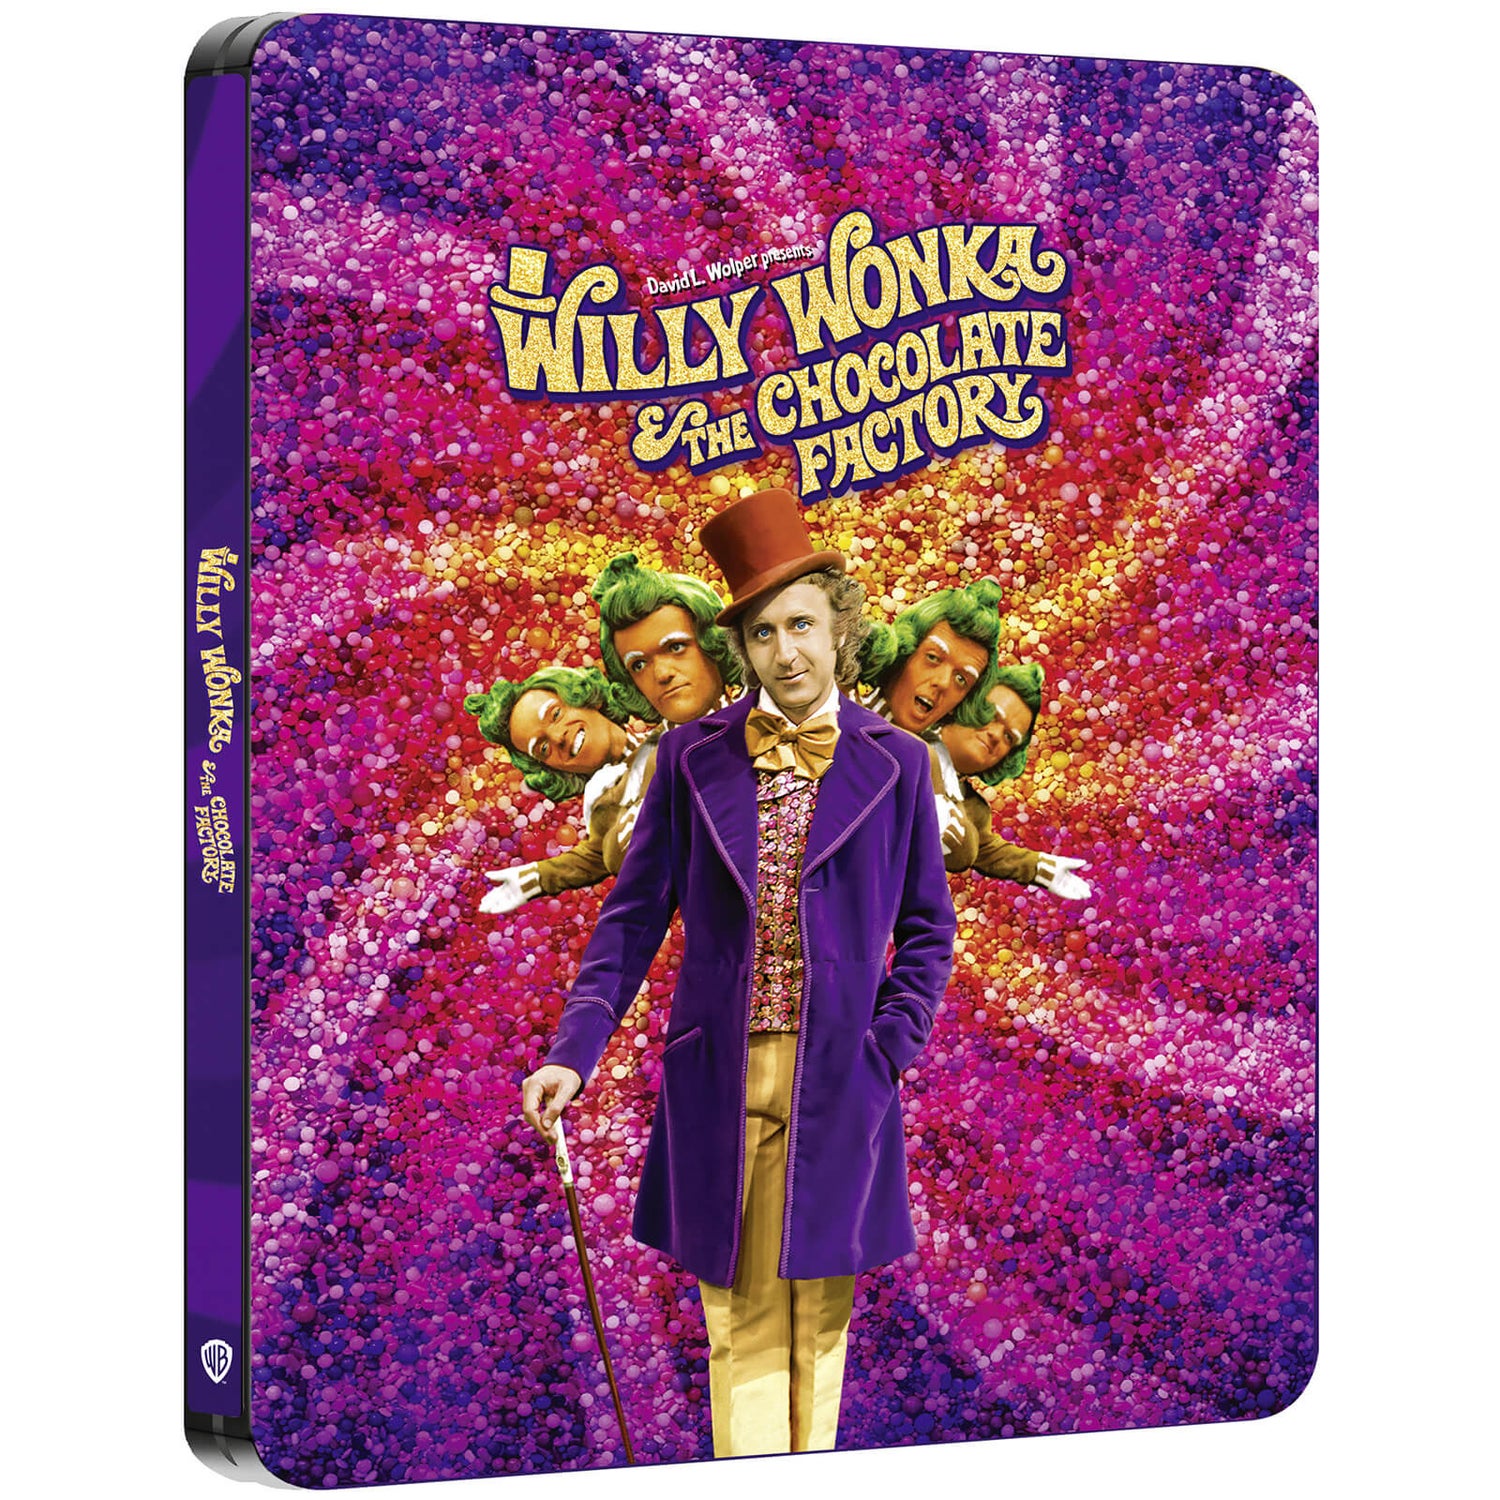 Willy Wonka & the Chocolate Factory - Zavvi Exclusive 4K Ultra HD Steelbook (Includes Blu-ray)